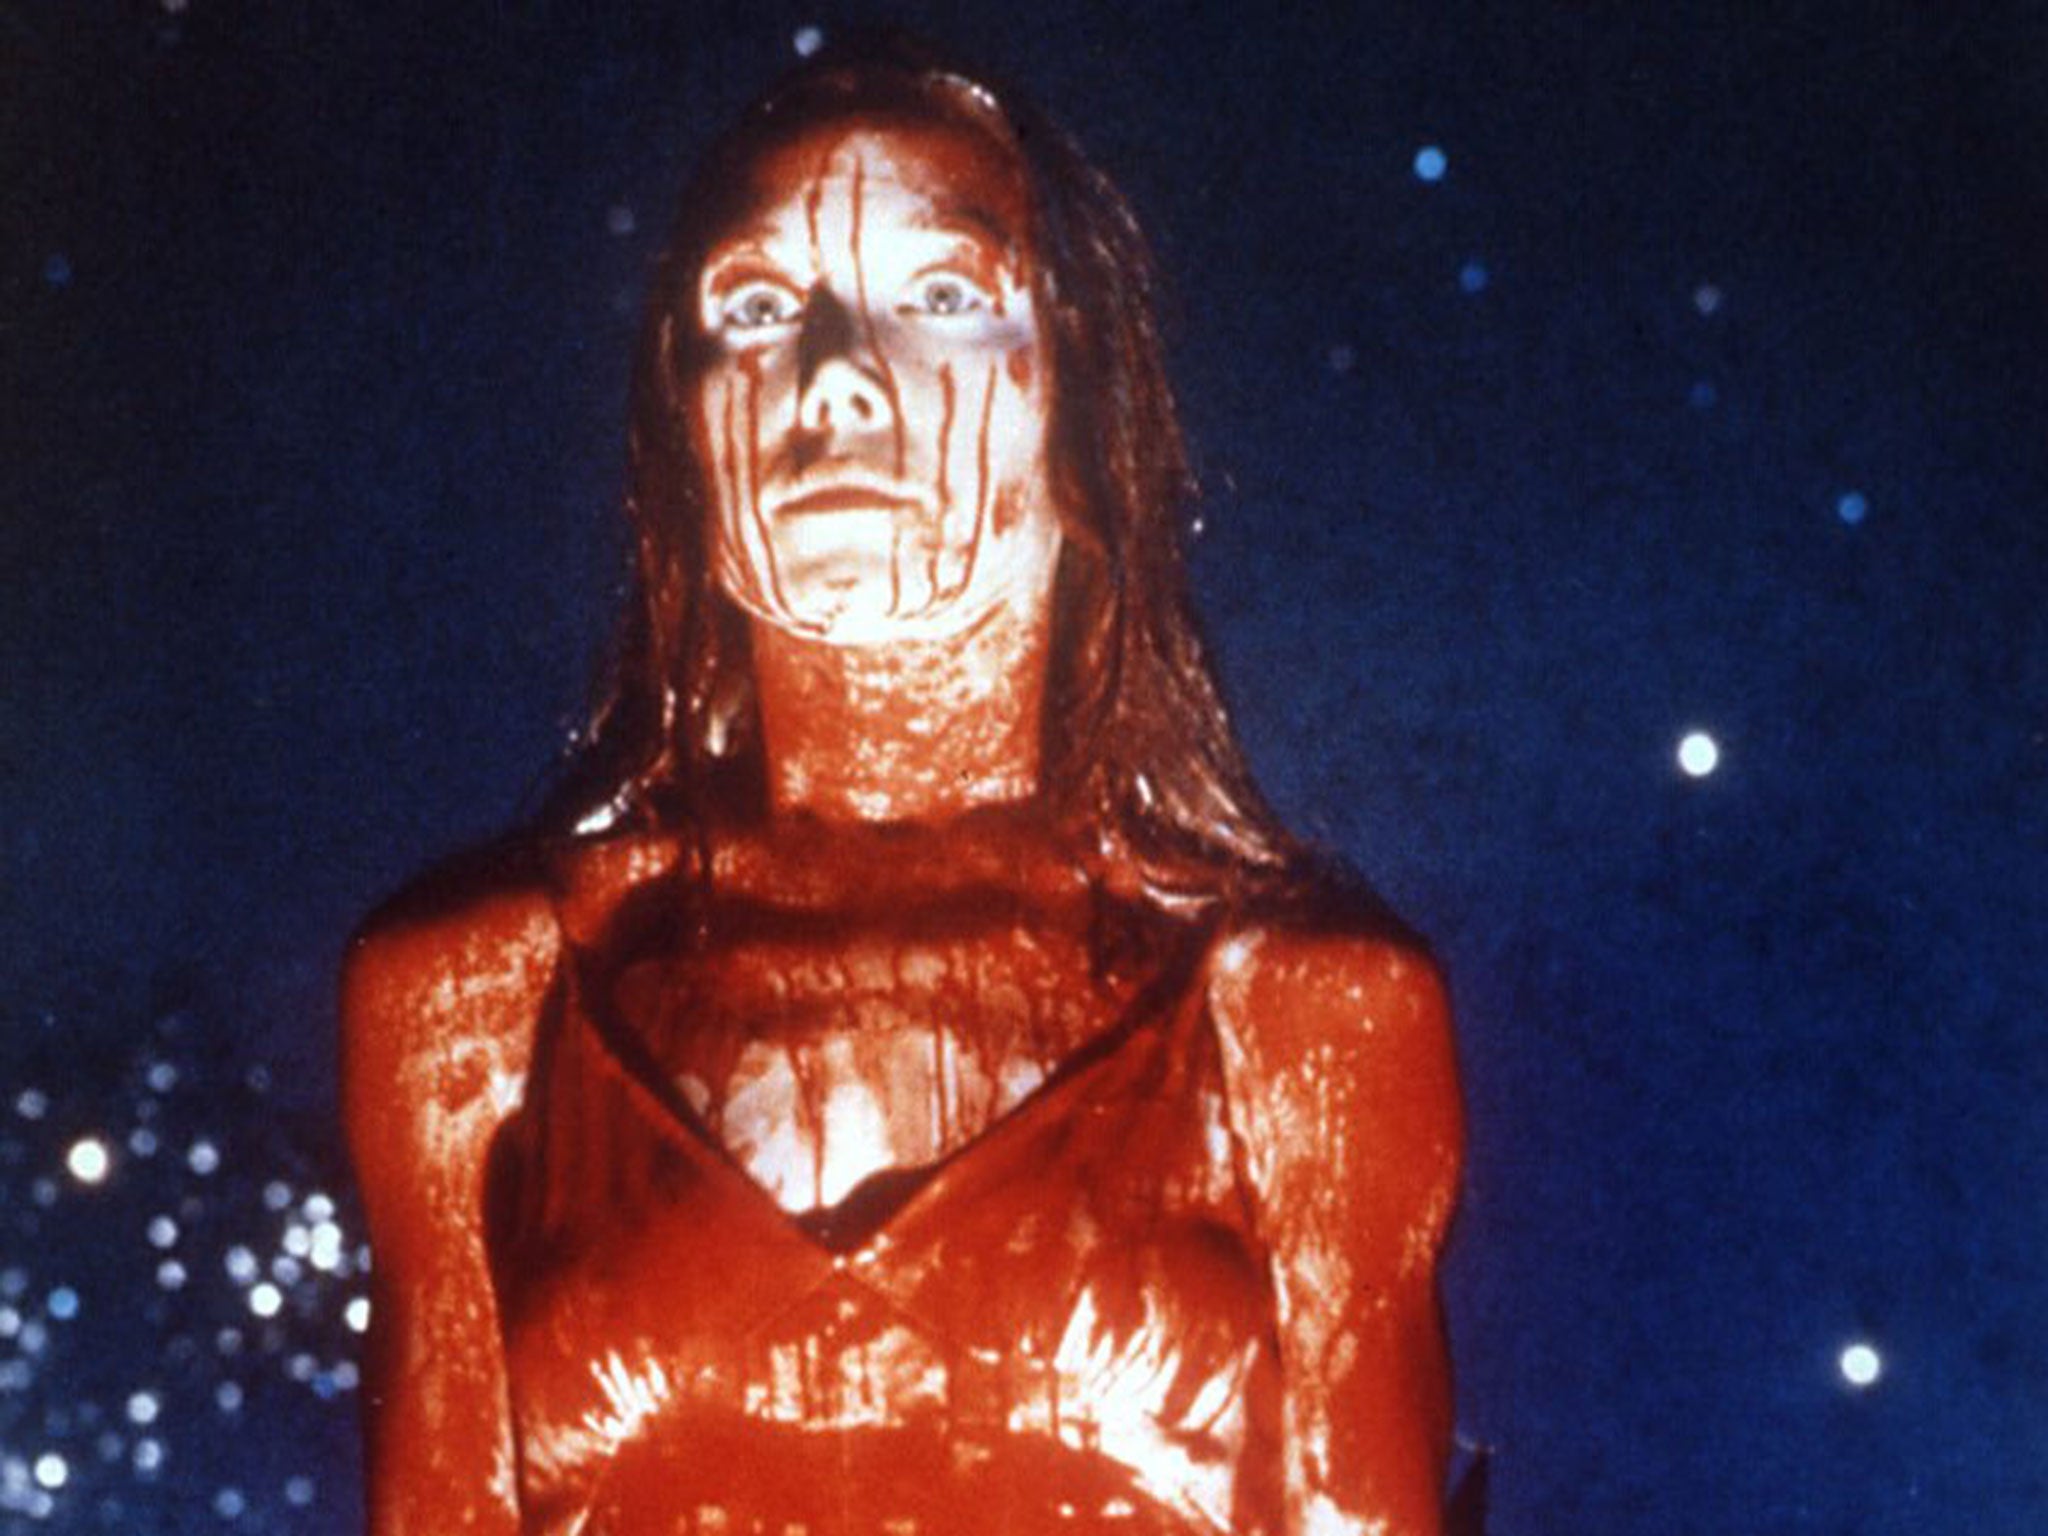 Carrie is drenched in pig's blood in Carrie